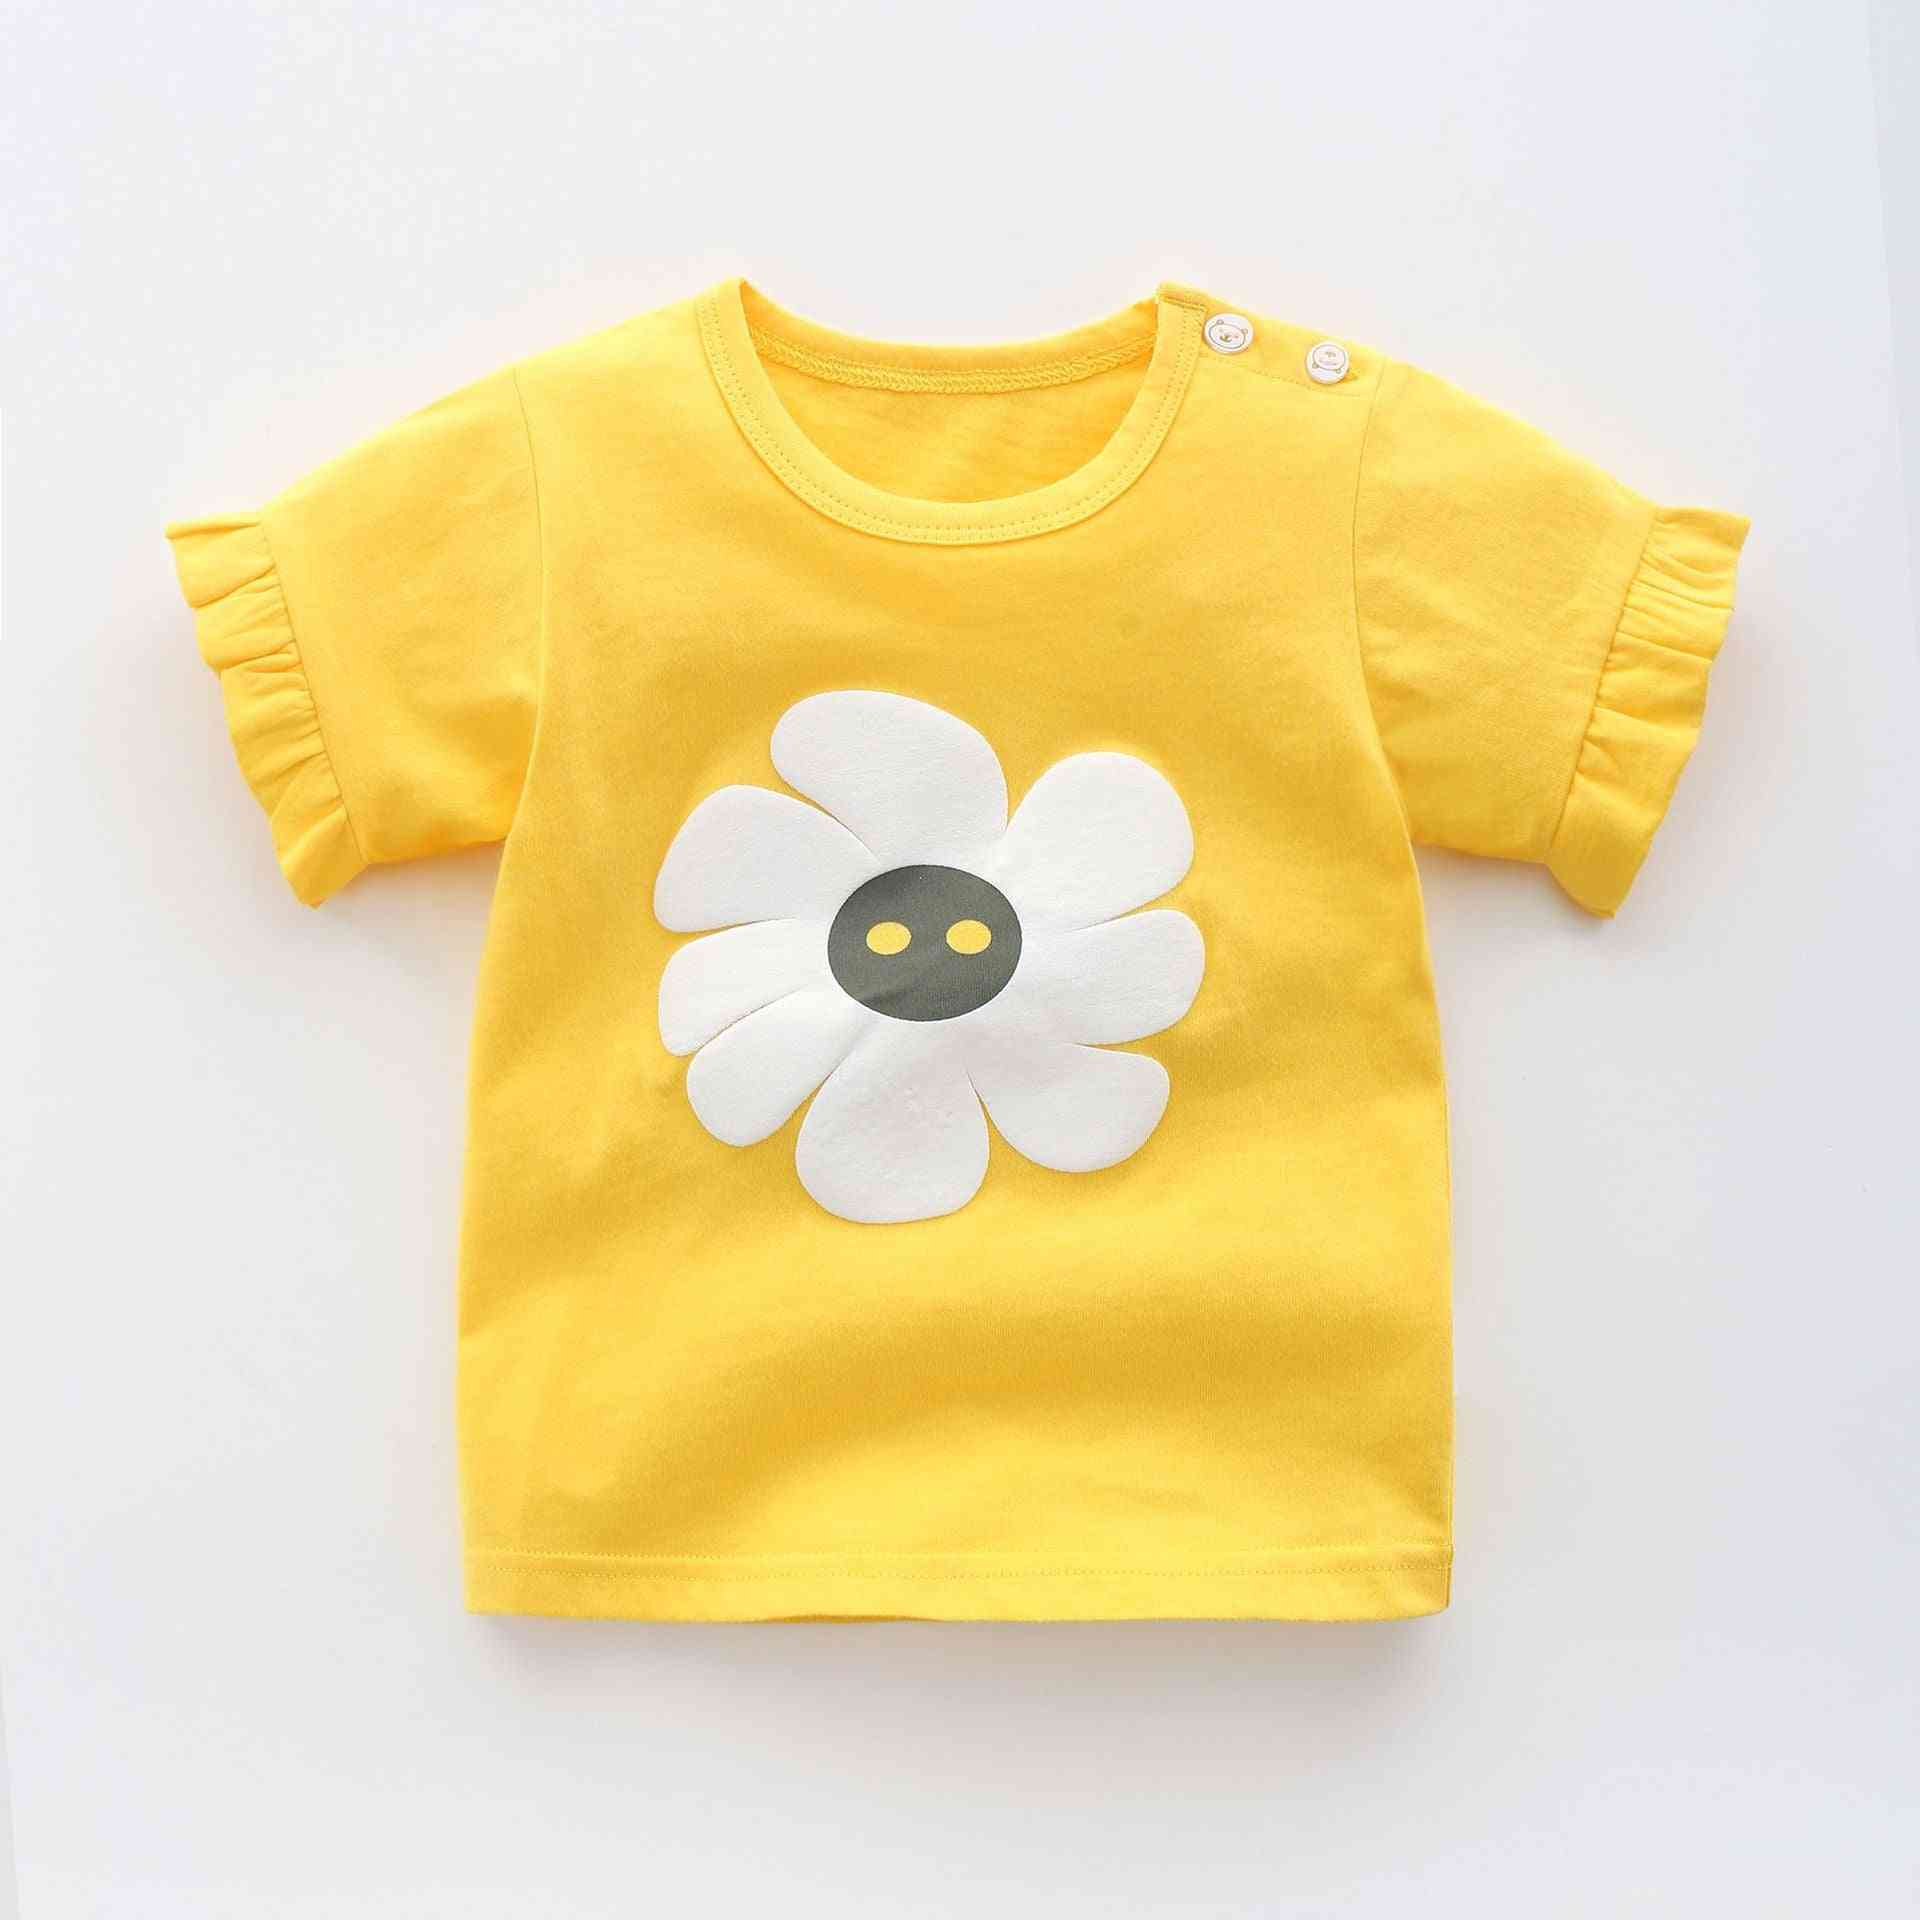 Cartoon Printed Short Sleeve T-shirts For Baby (9 Months)